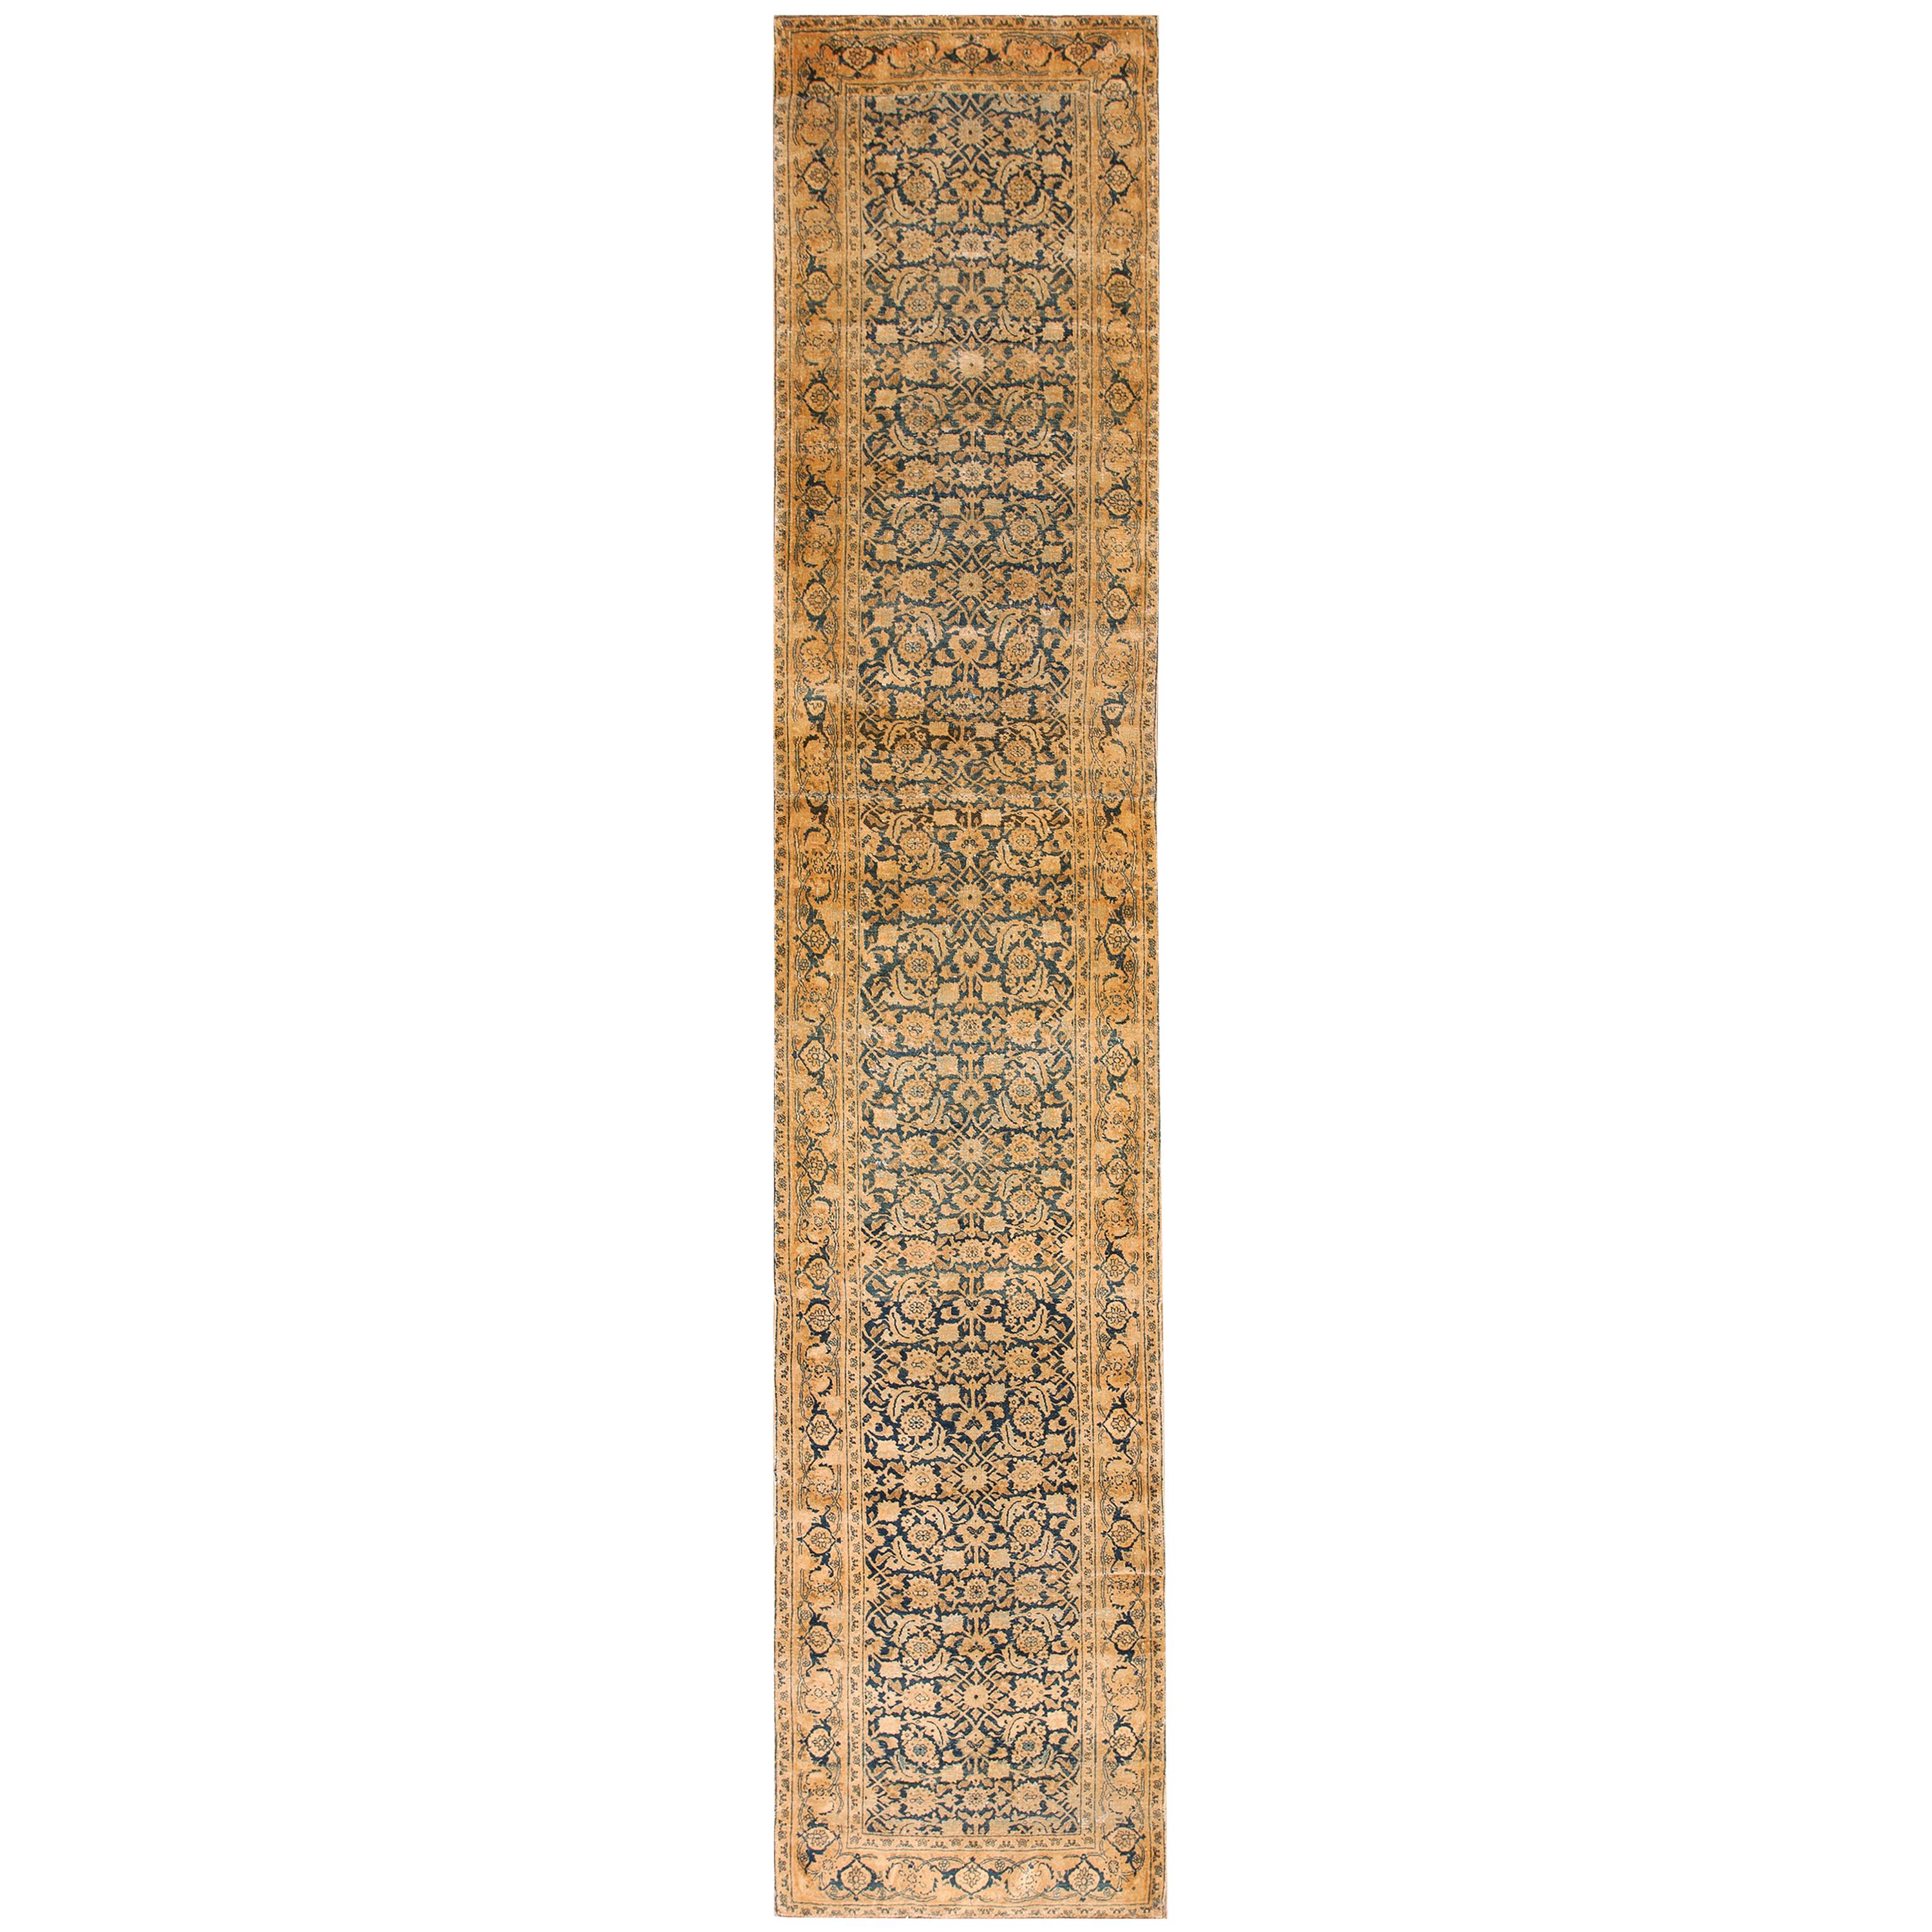 Early 20th Century Persian Tabriz Carpet ( 2'9" x 13'8" - 84 x 417 ) For Sale